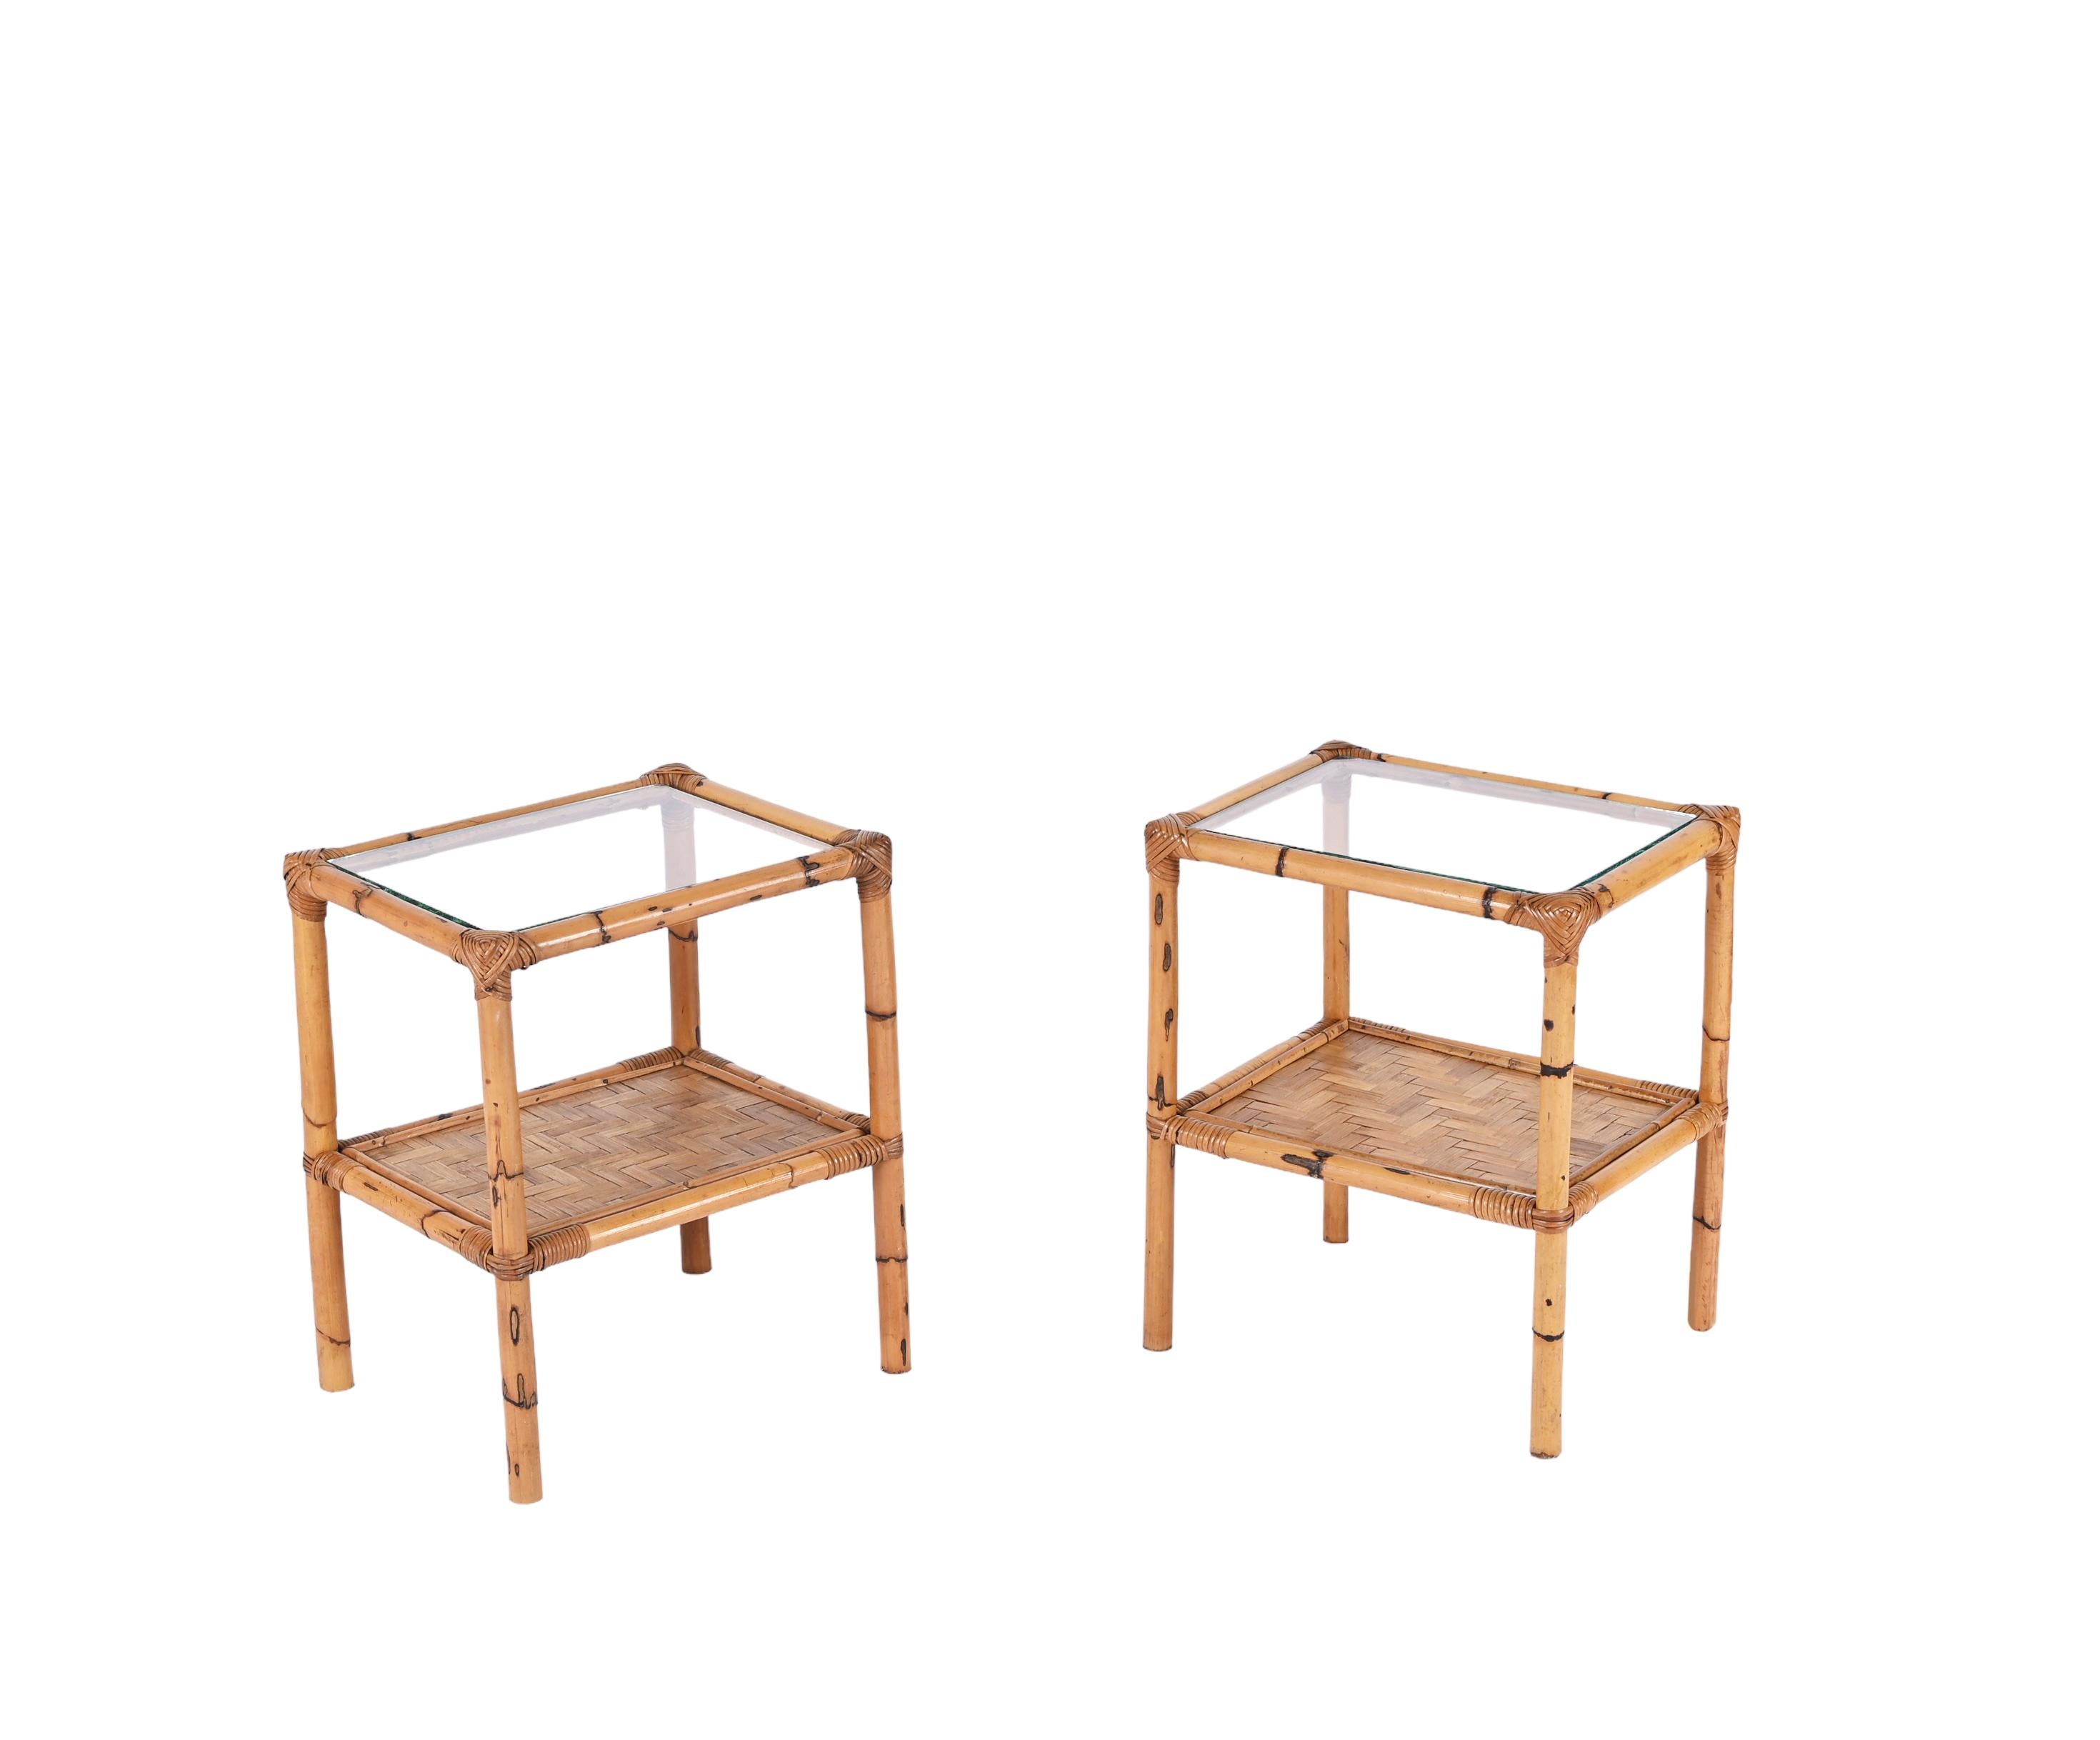 Pair of Mid-Century Italian Bedside Tables in Bamboo, Rattan and Glass, 1970s For Sale 9